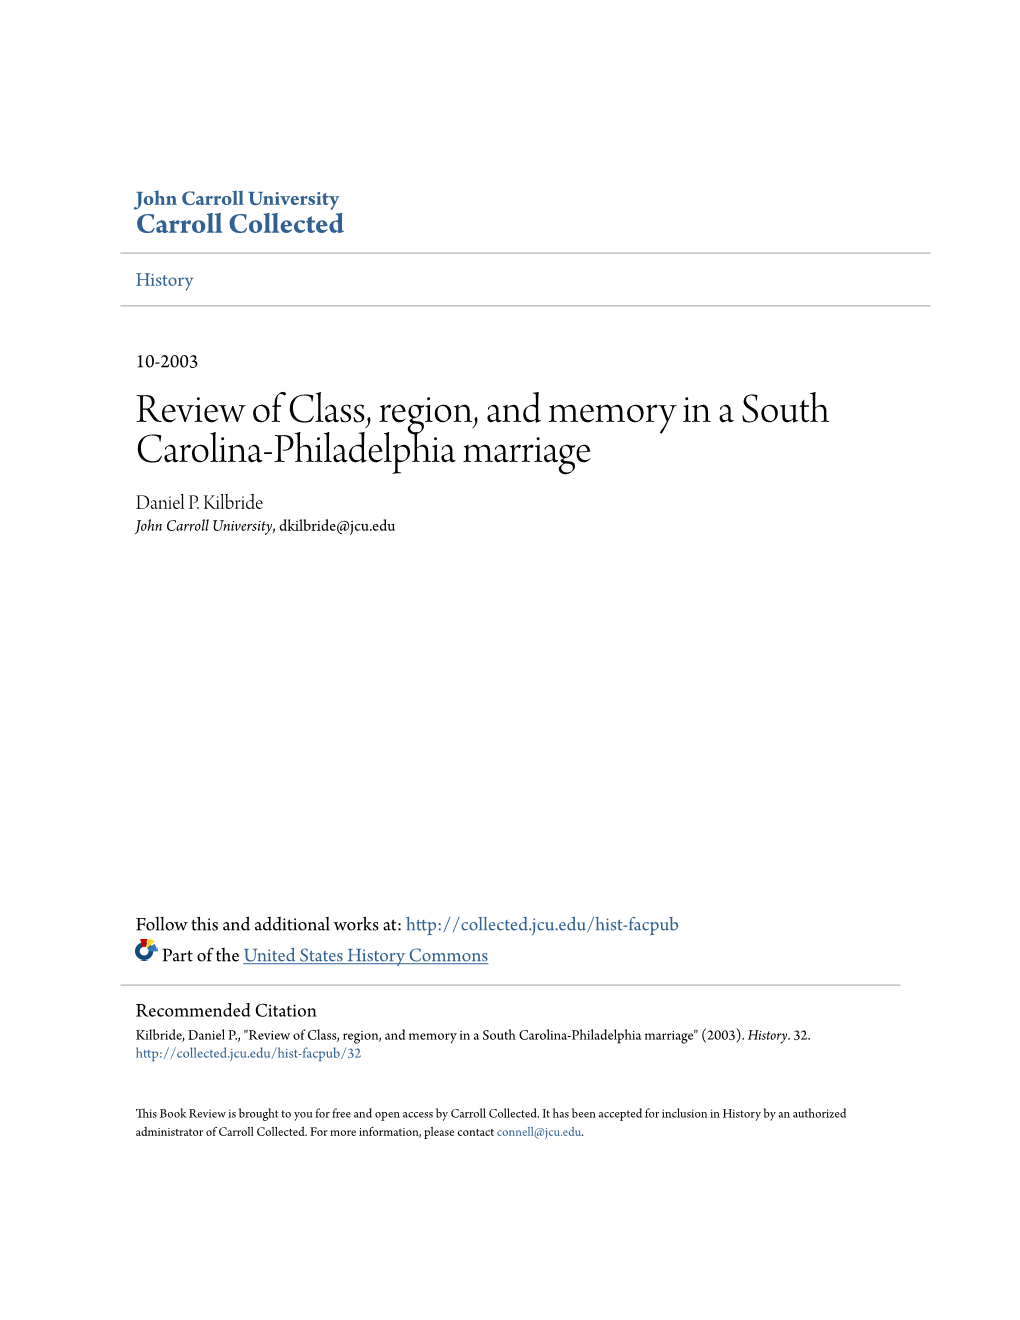 Review of Class, Region, and Memory in a South Carolina-Philadelphia Marriage Daniel P